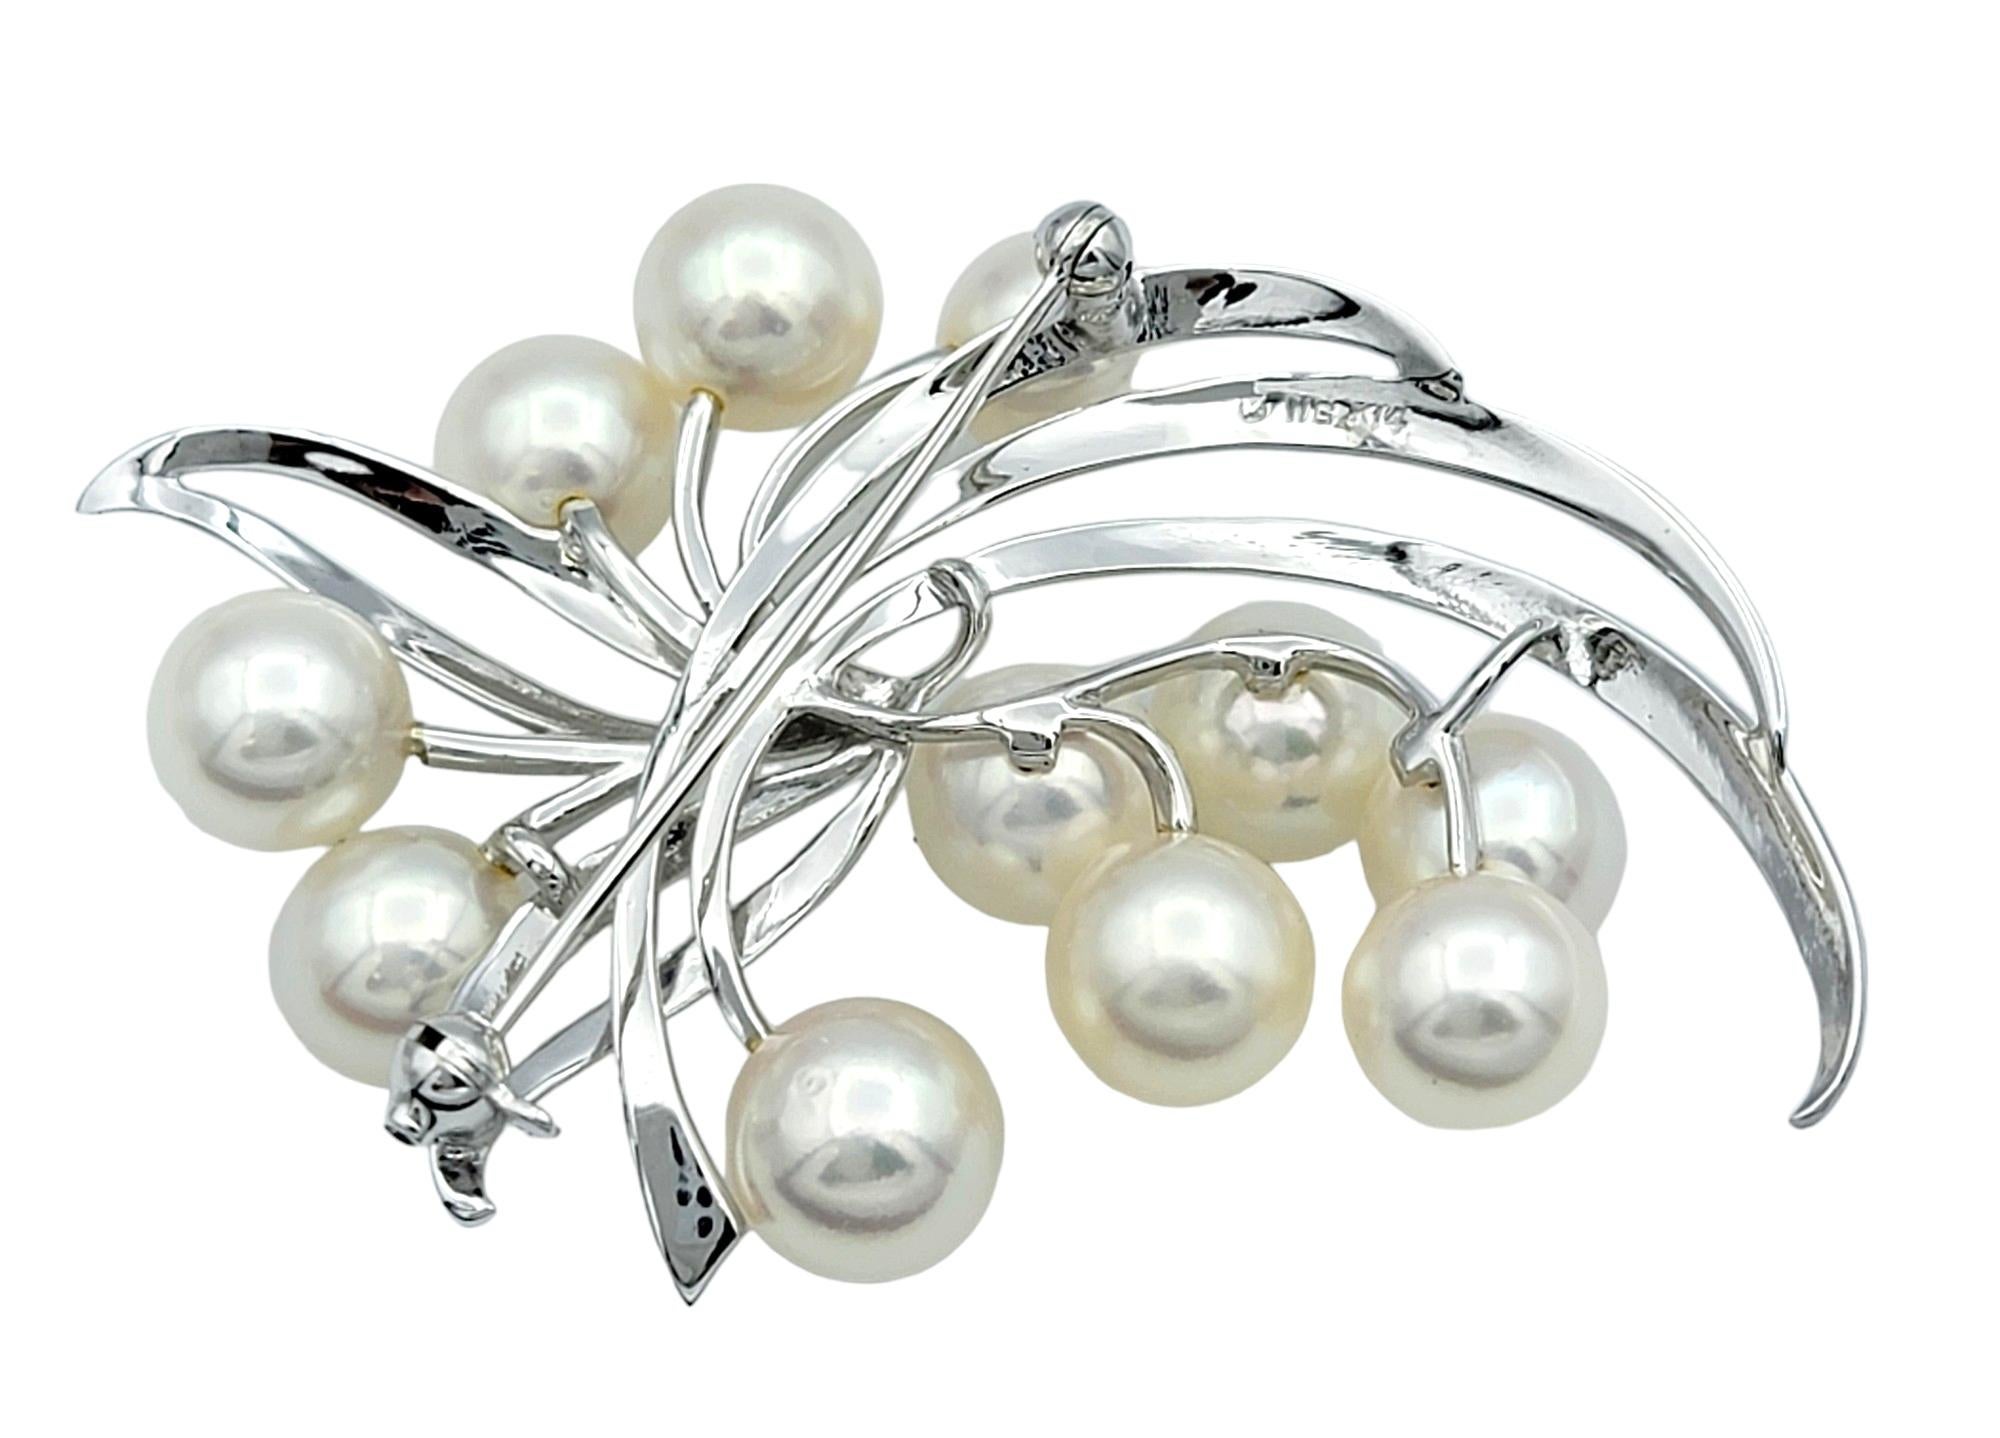 Round Cut Mikimoto White Akoya Cultured Pearl Spray Brooch Set in 14 Karat White Gold For Sale